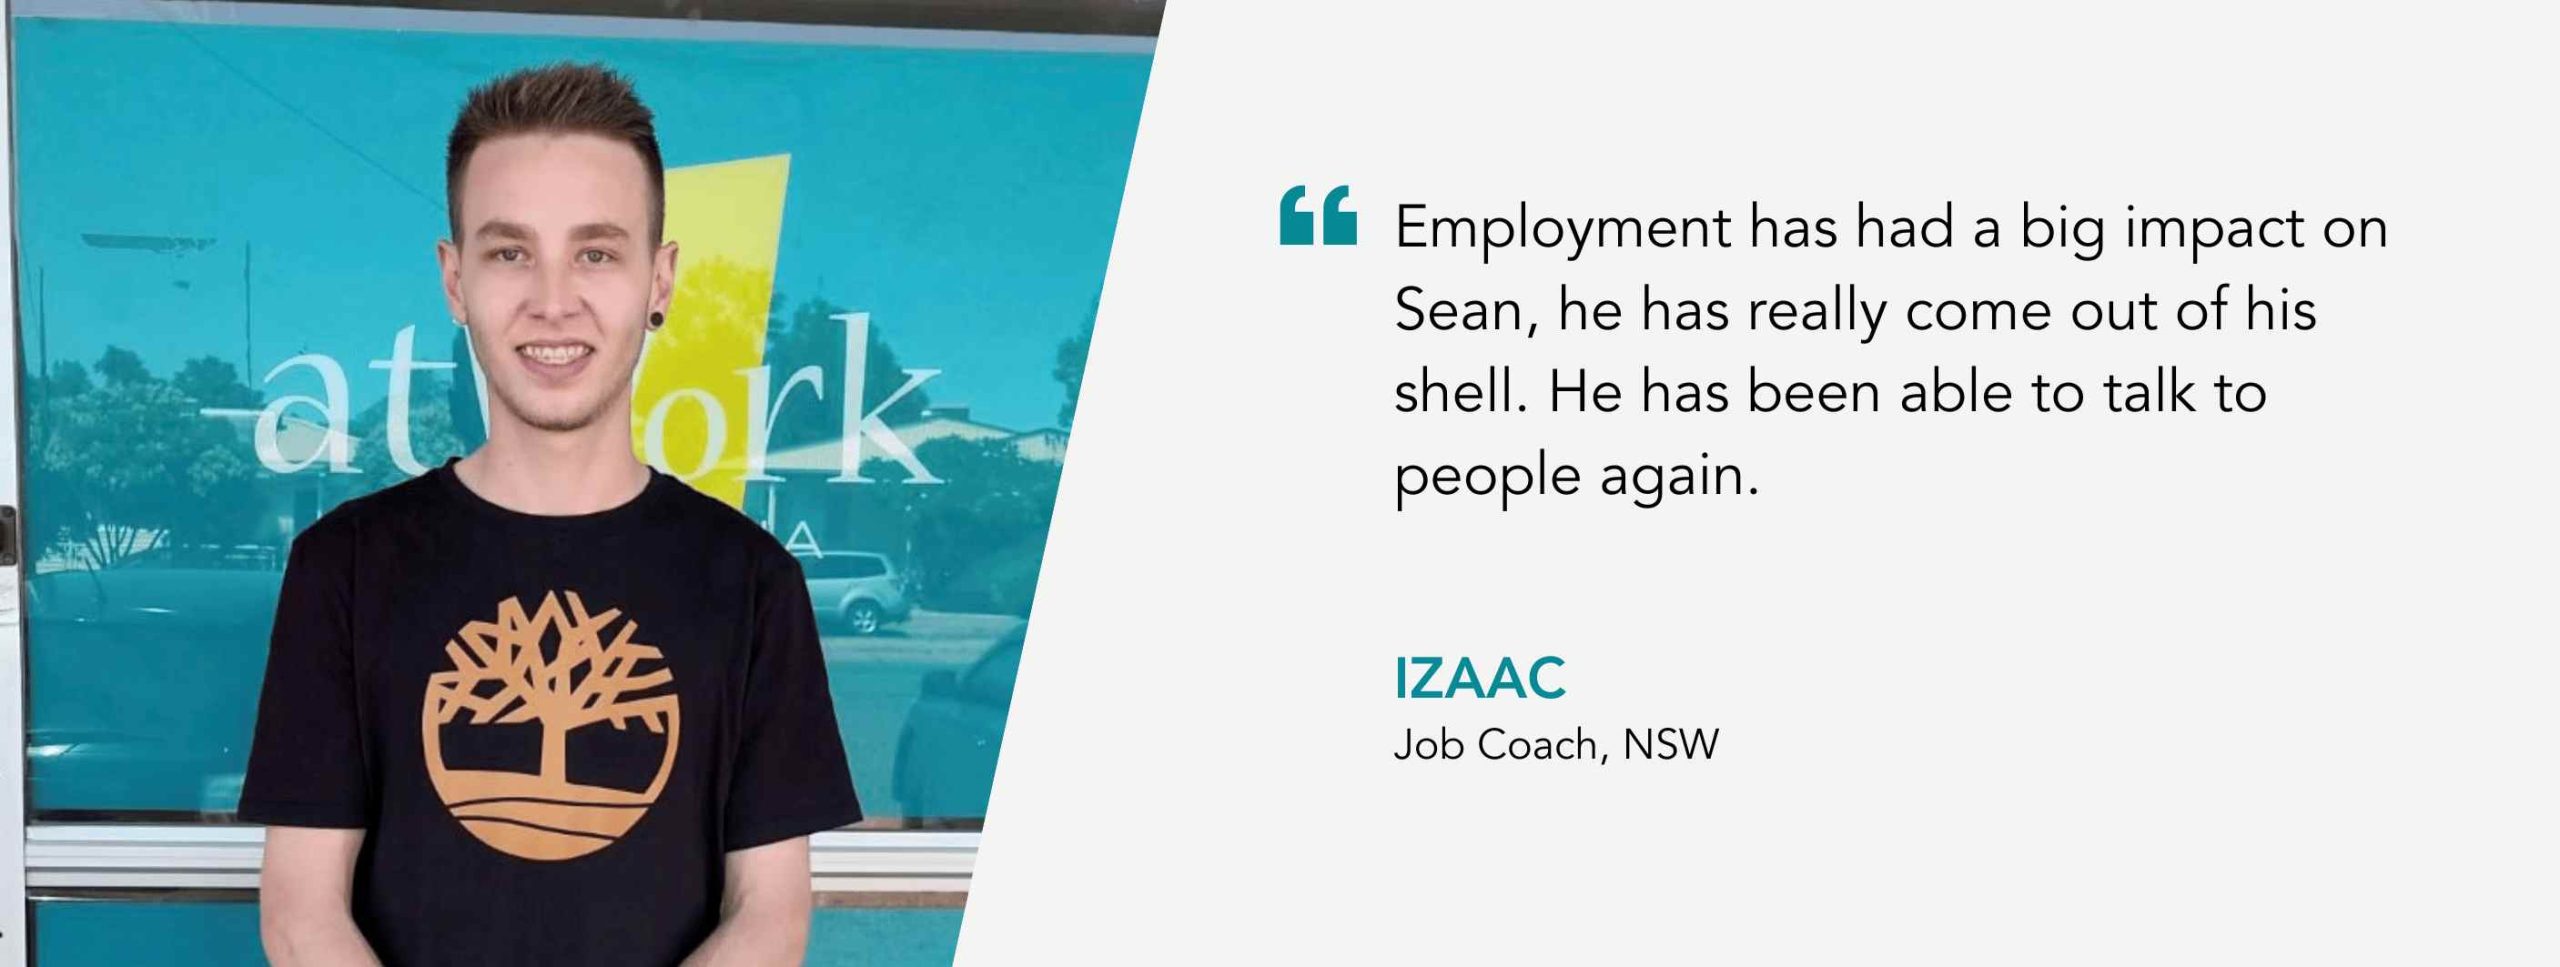 Employment has had a big impact on Sean, he has really come out of his shell. He has been able to talk to people again. Izaac, Job Coach, NSW